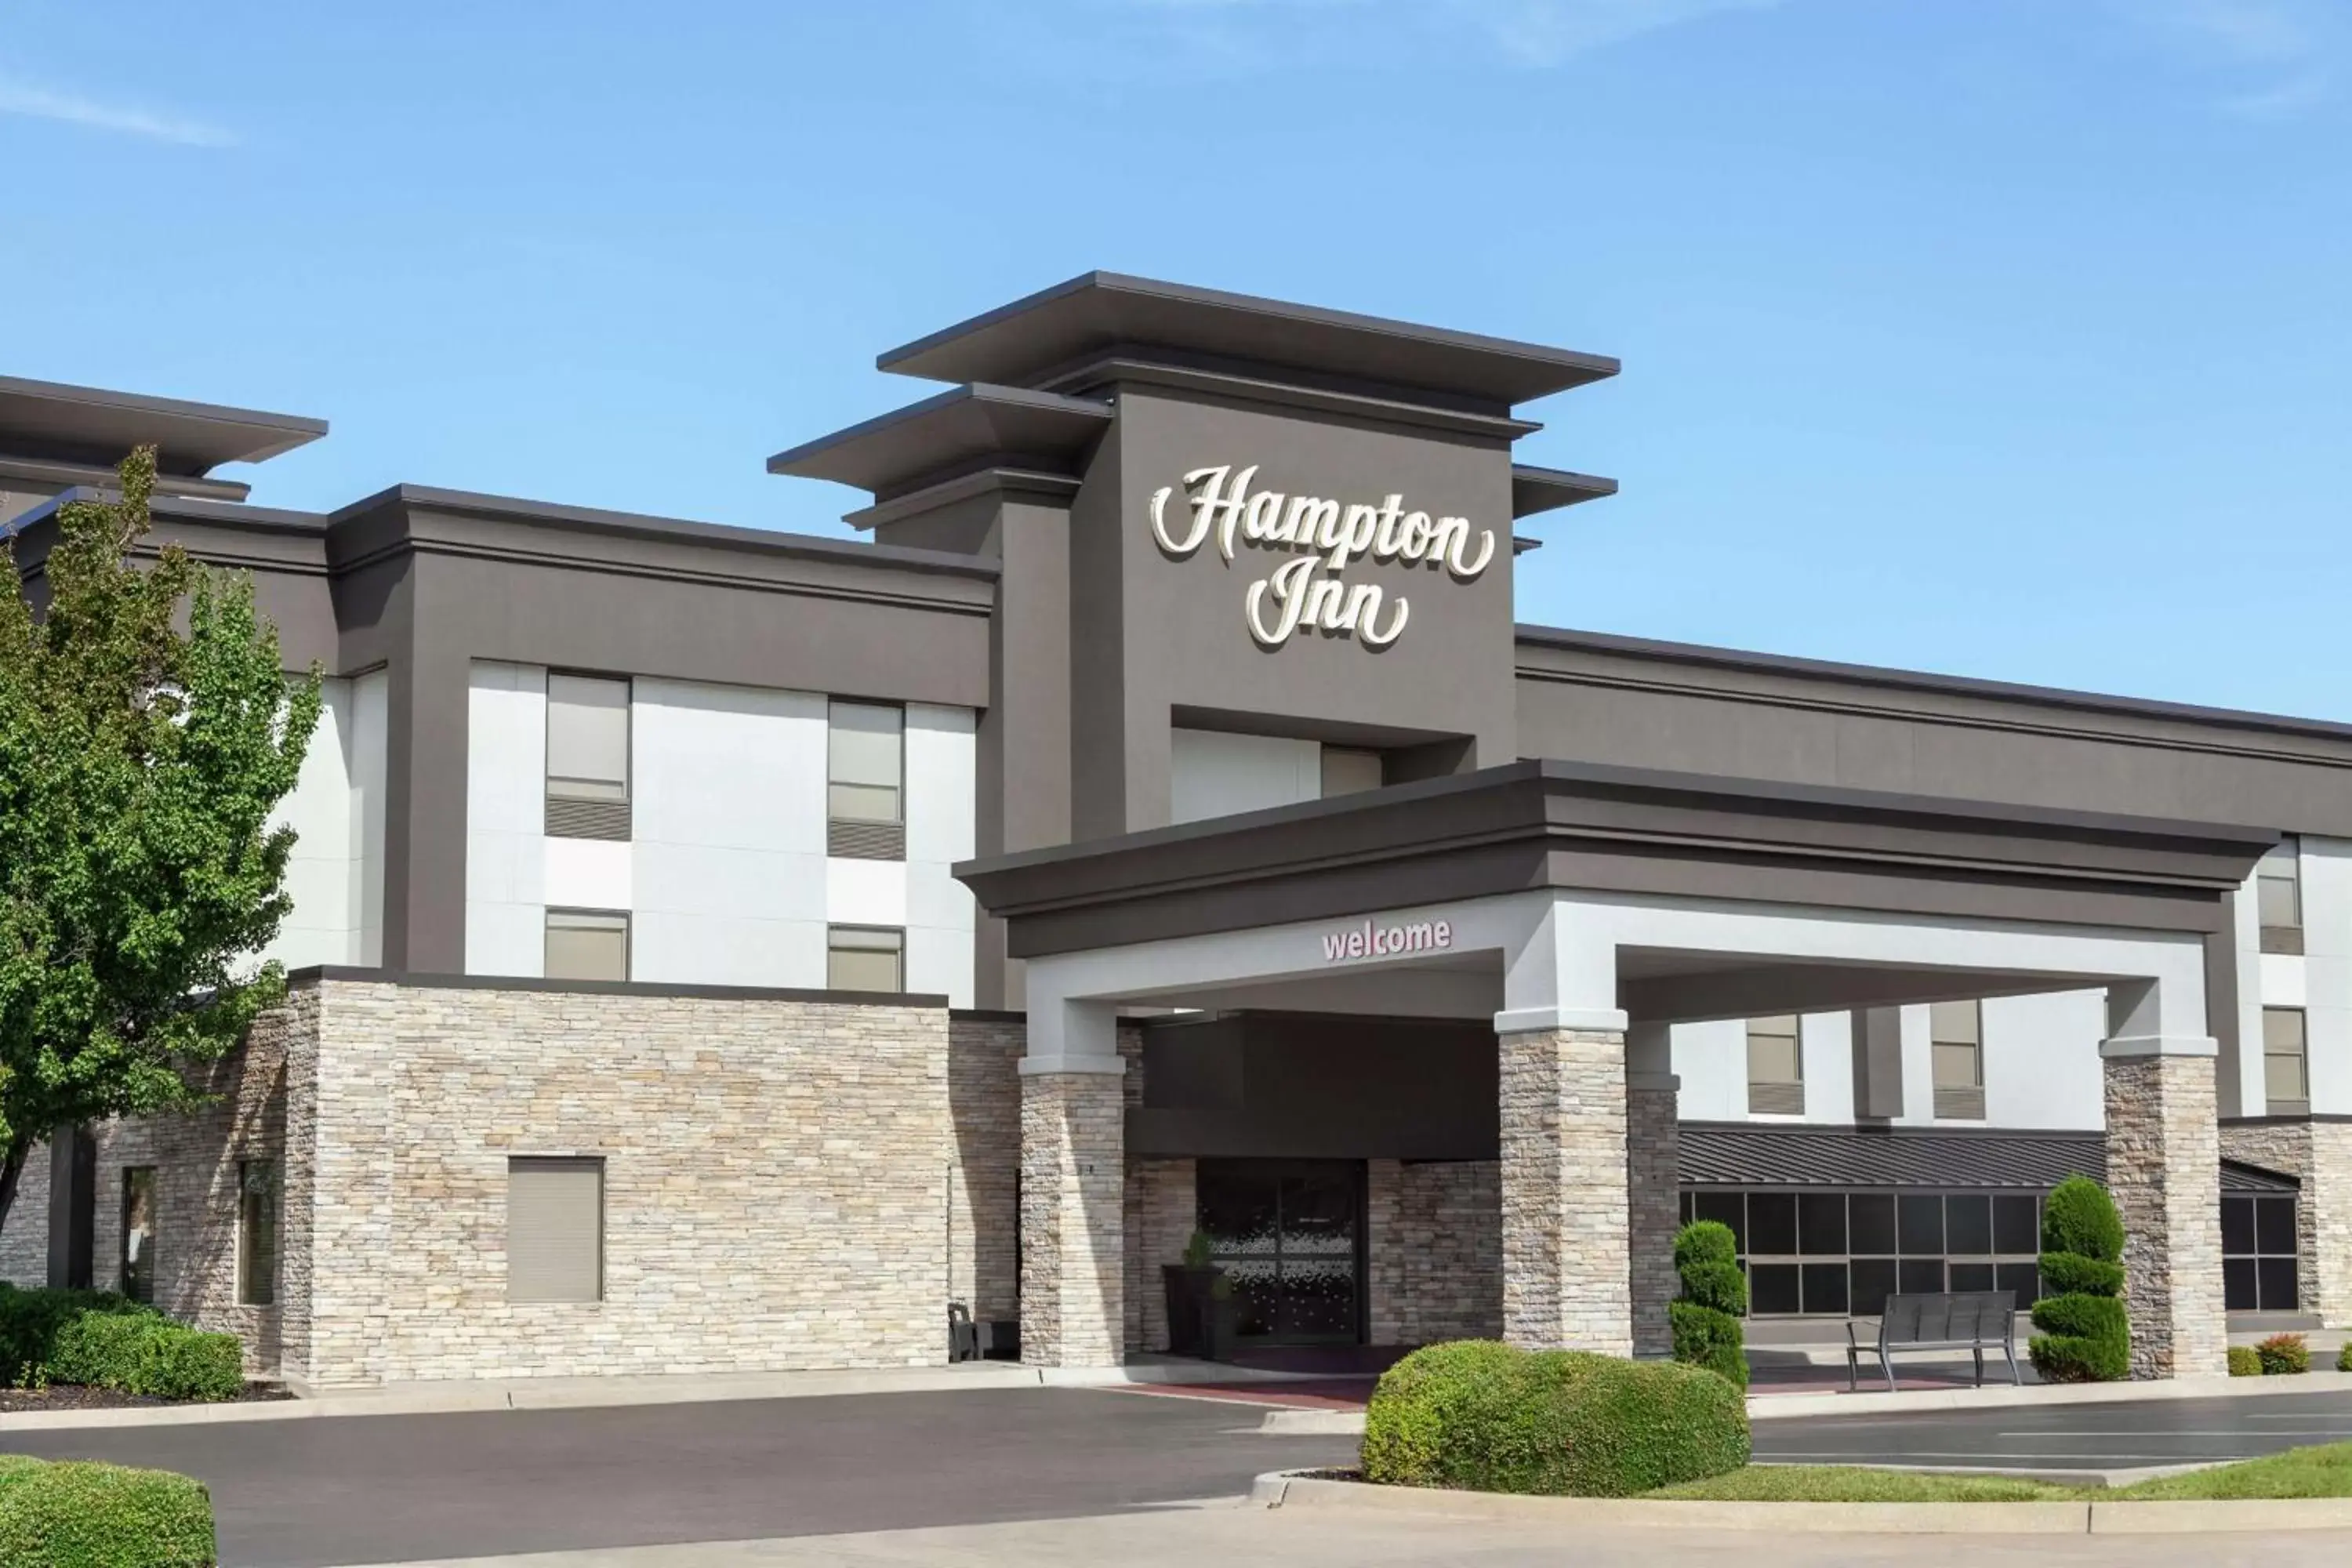 Property Building in Hampton by Hilton Oklahoma City I-40 East- Tinker AFB